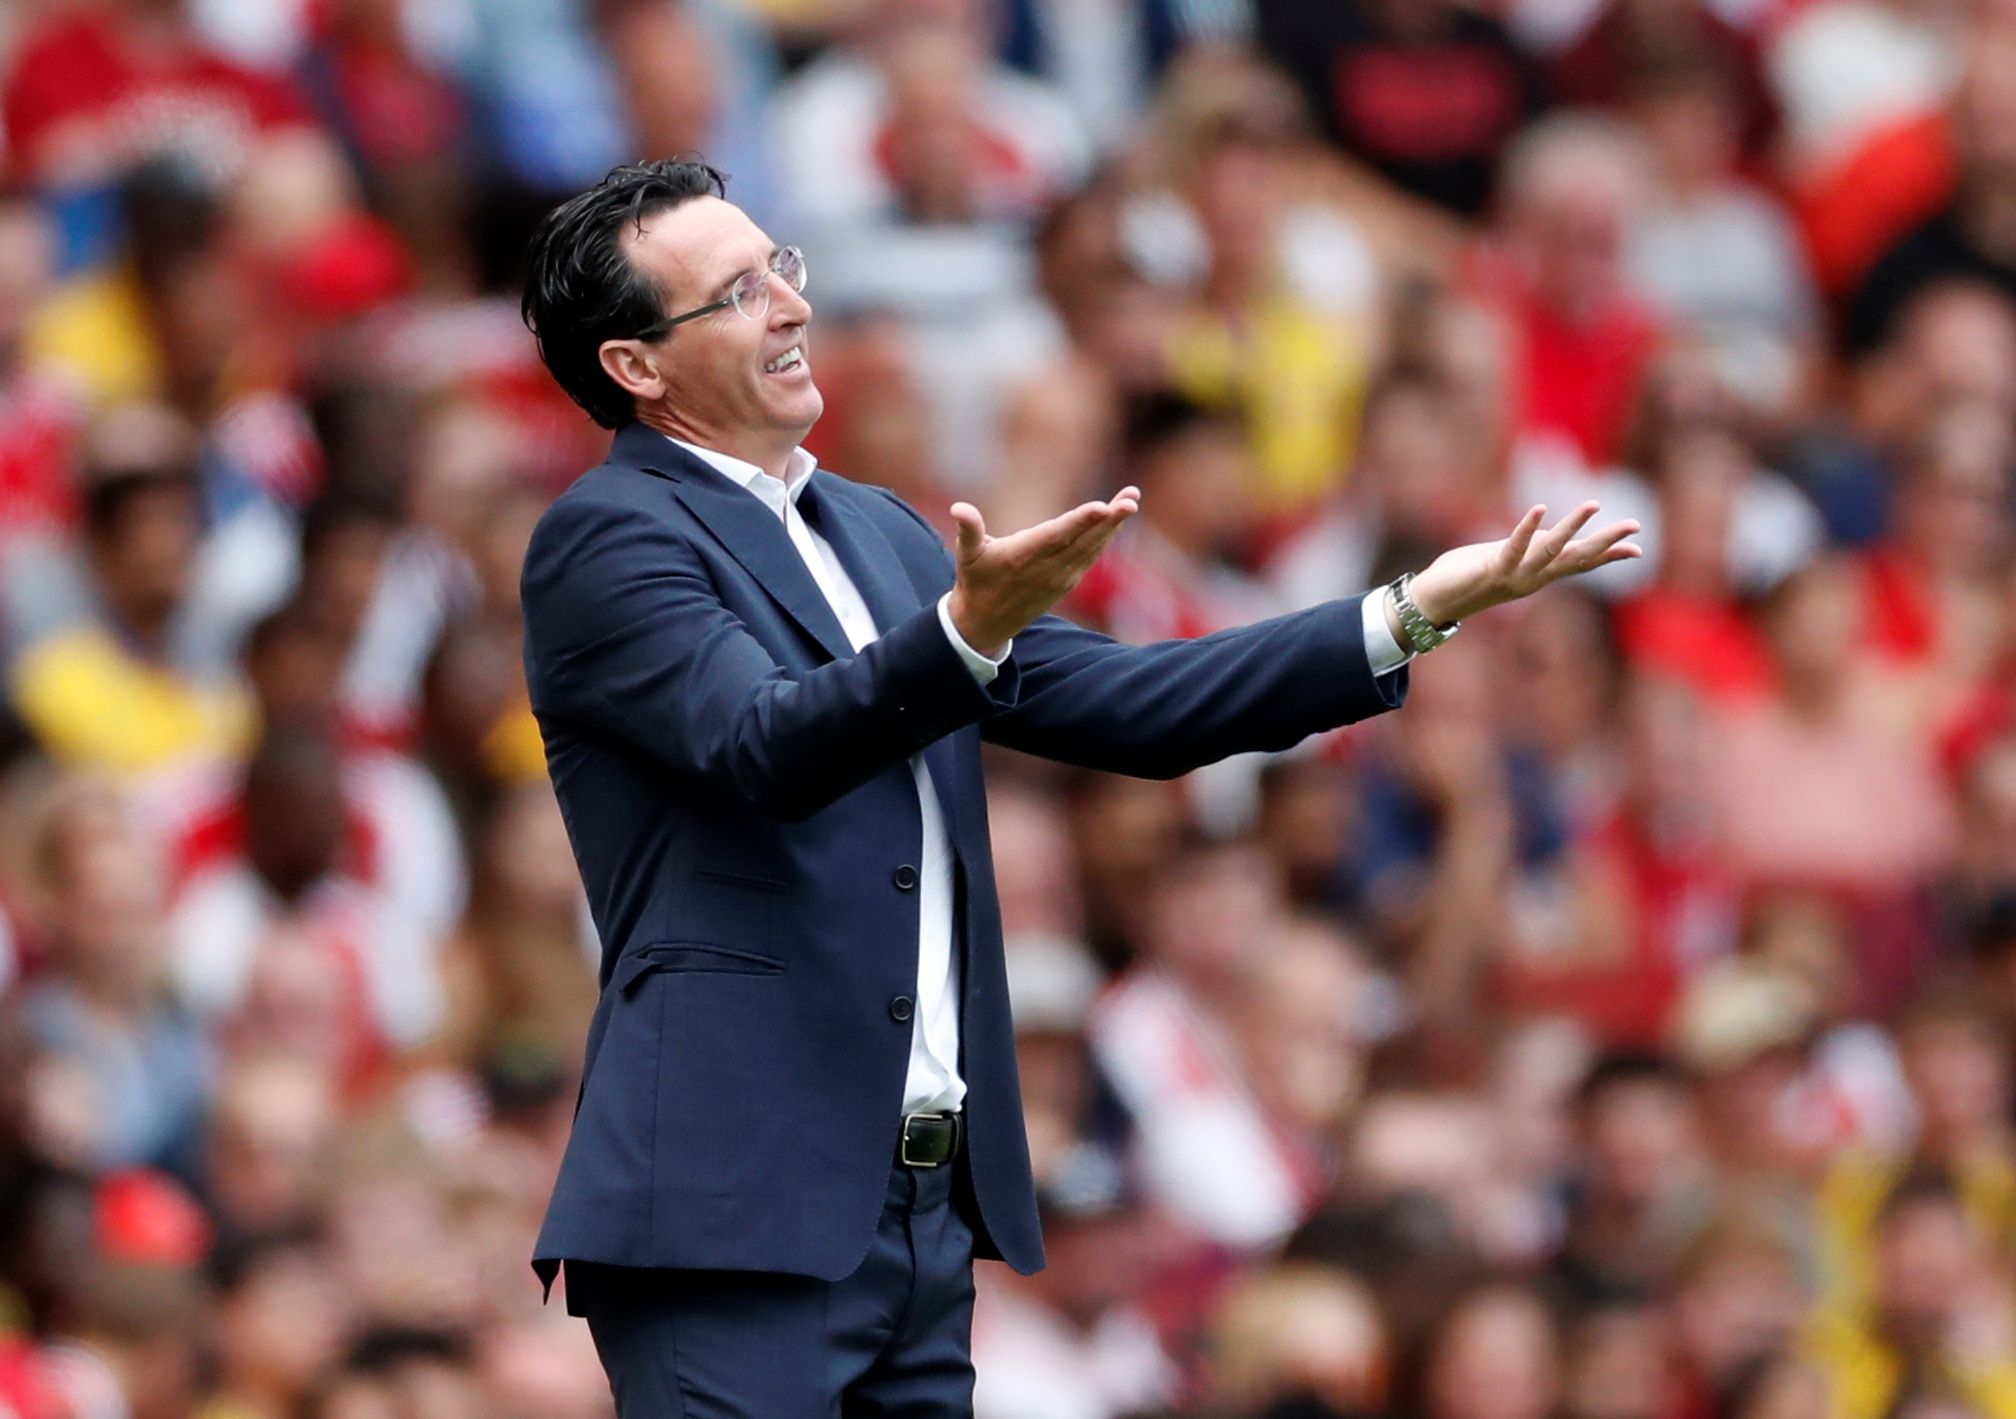 Soccer Football - Emirates Cup - Arsenal v Olympique Lyonnais - Emirates Stadium, London, Britain - July 28, 2019   Arsenal manager Unai Emery reacts   Action Images via Reuters/Matthew Childs